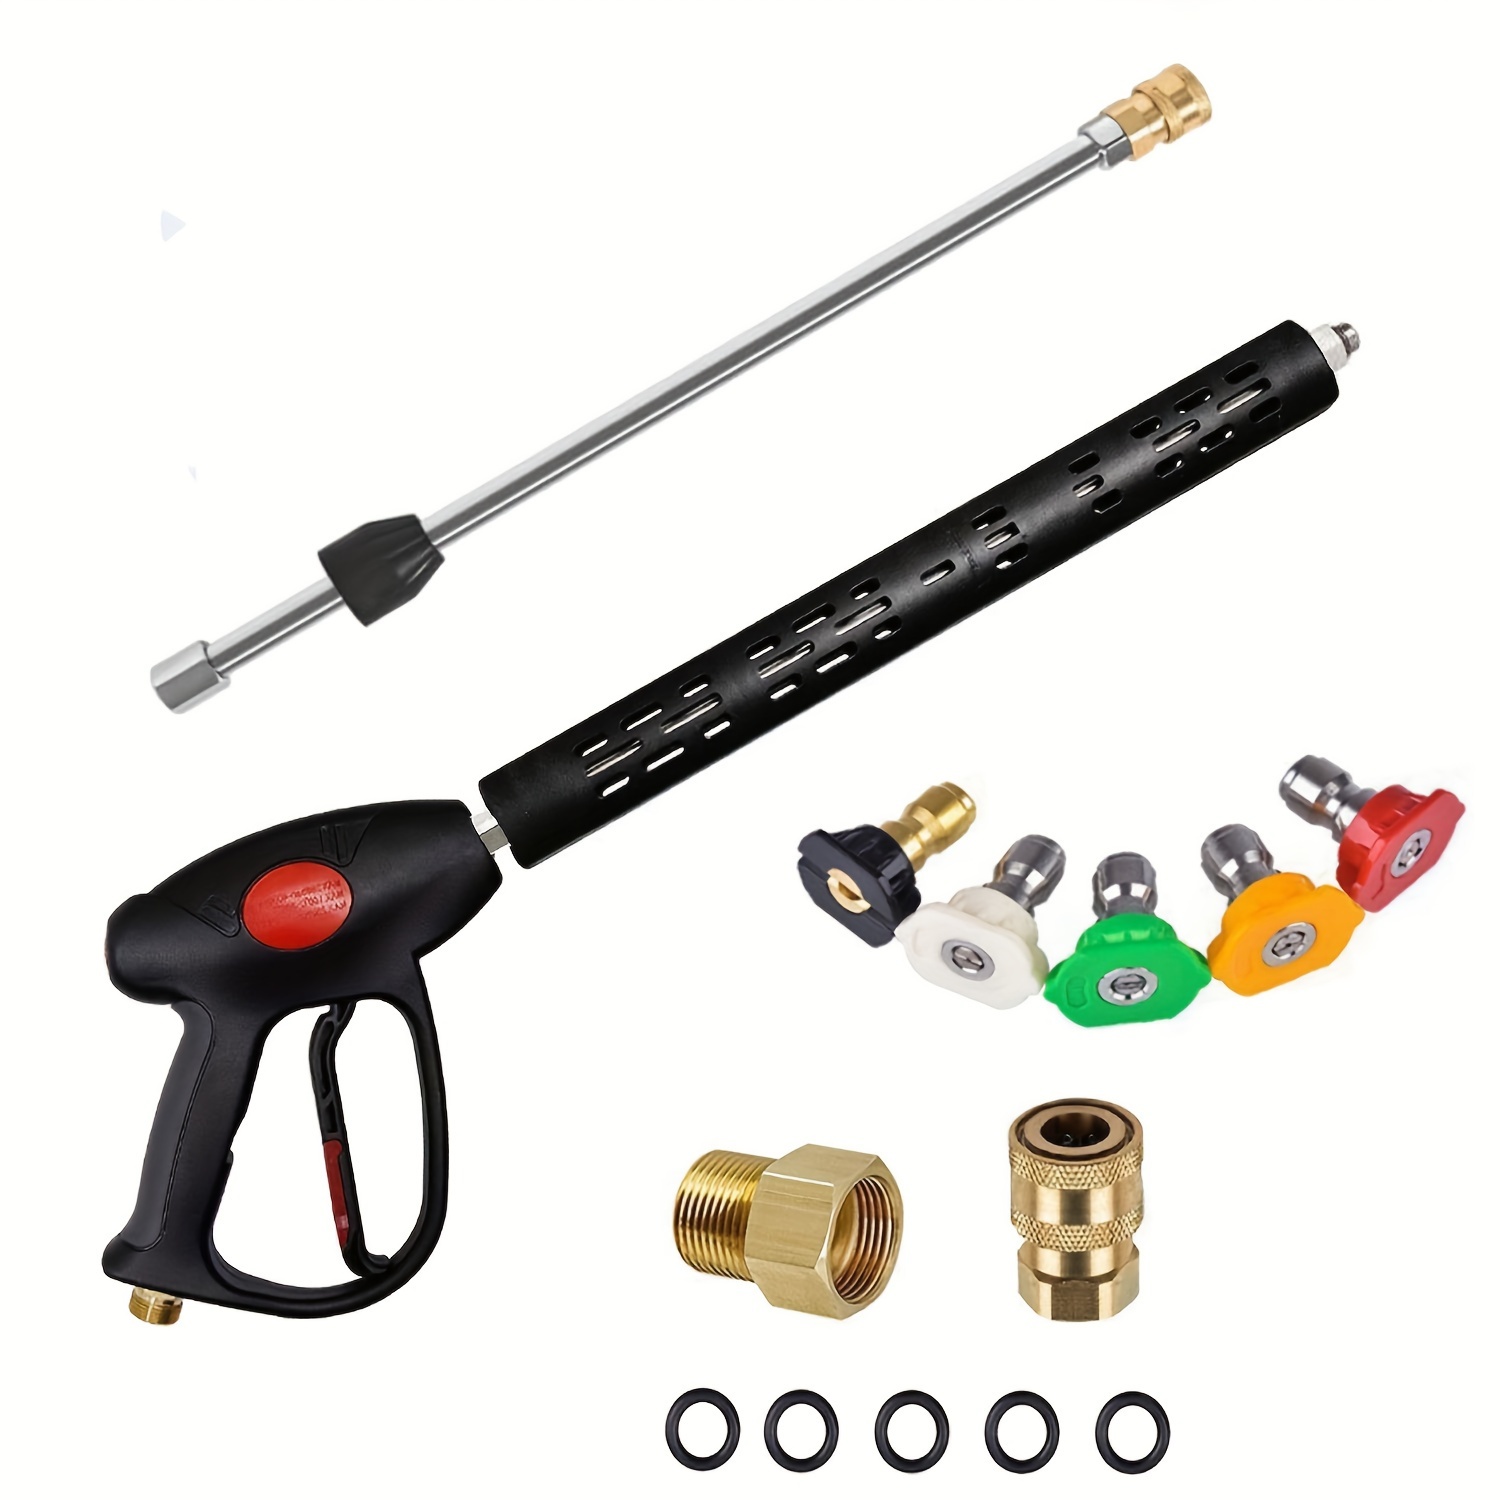 Foam Cannon for Pressure Washer Car Wash Foam Gun Kit M22-14mm and Quick  Inlet Connector with Quick Connector 5PCS Nozzle Tips - AliExpress